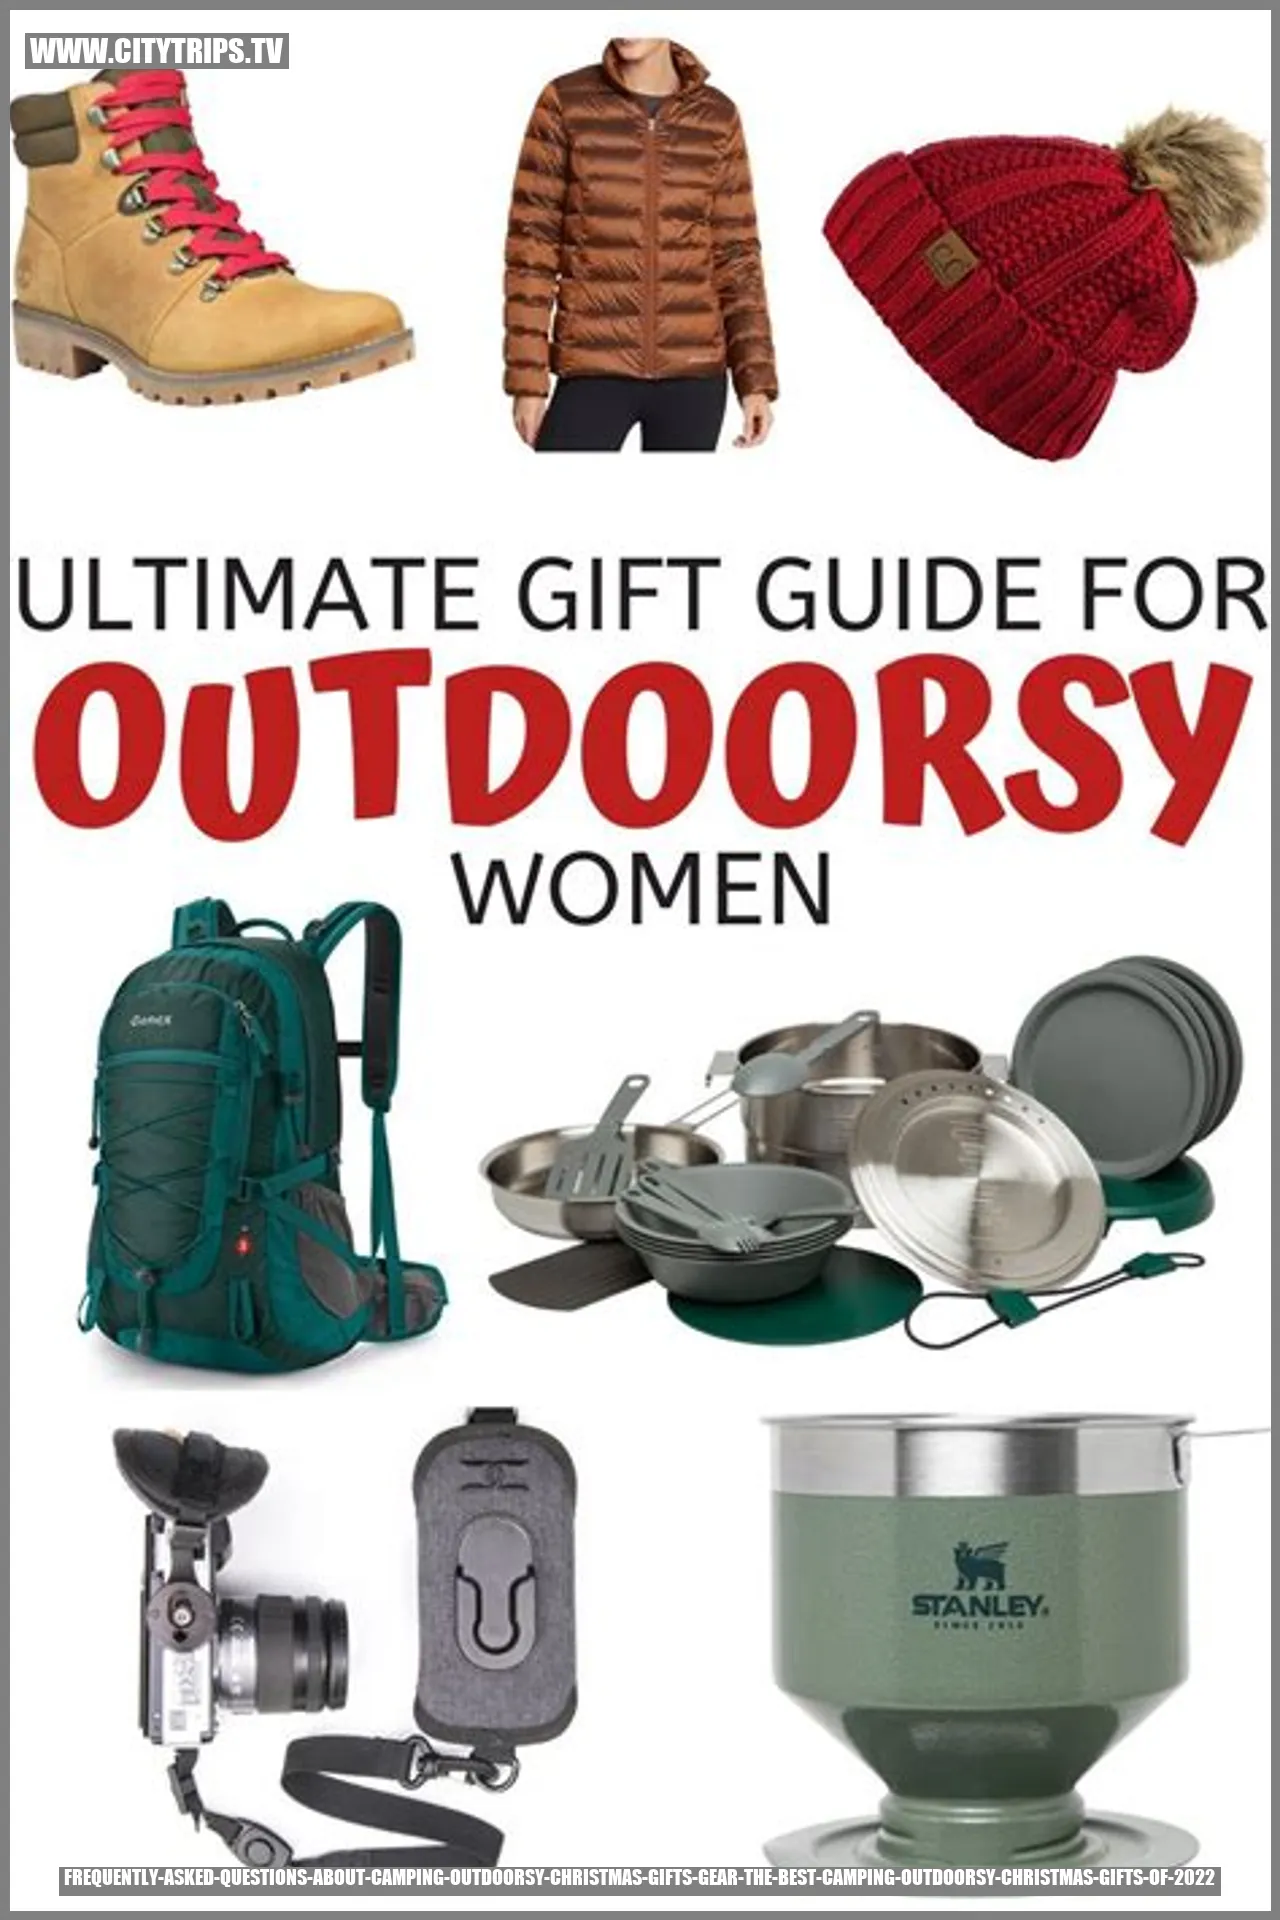 Frequently Asked Questions about Camping Outdoorsy Christmas Gifts